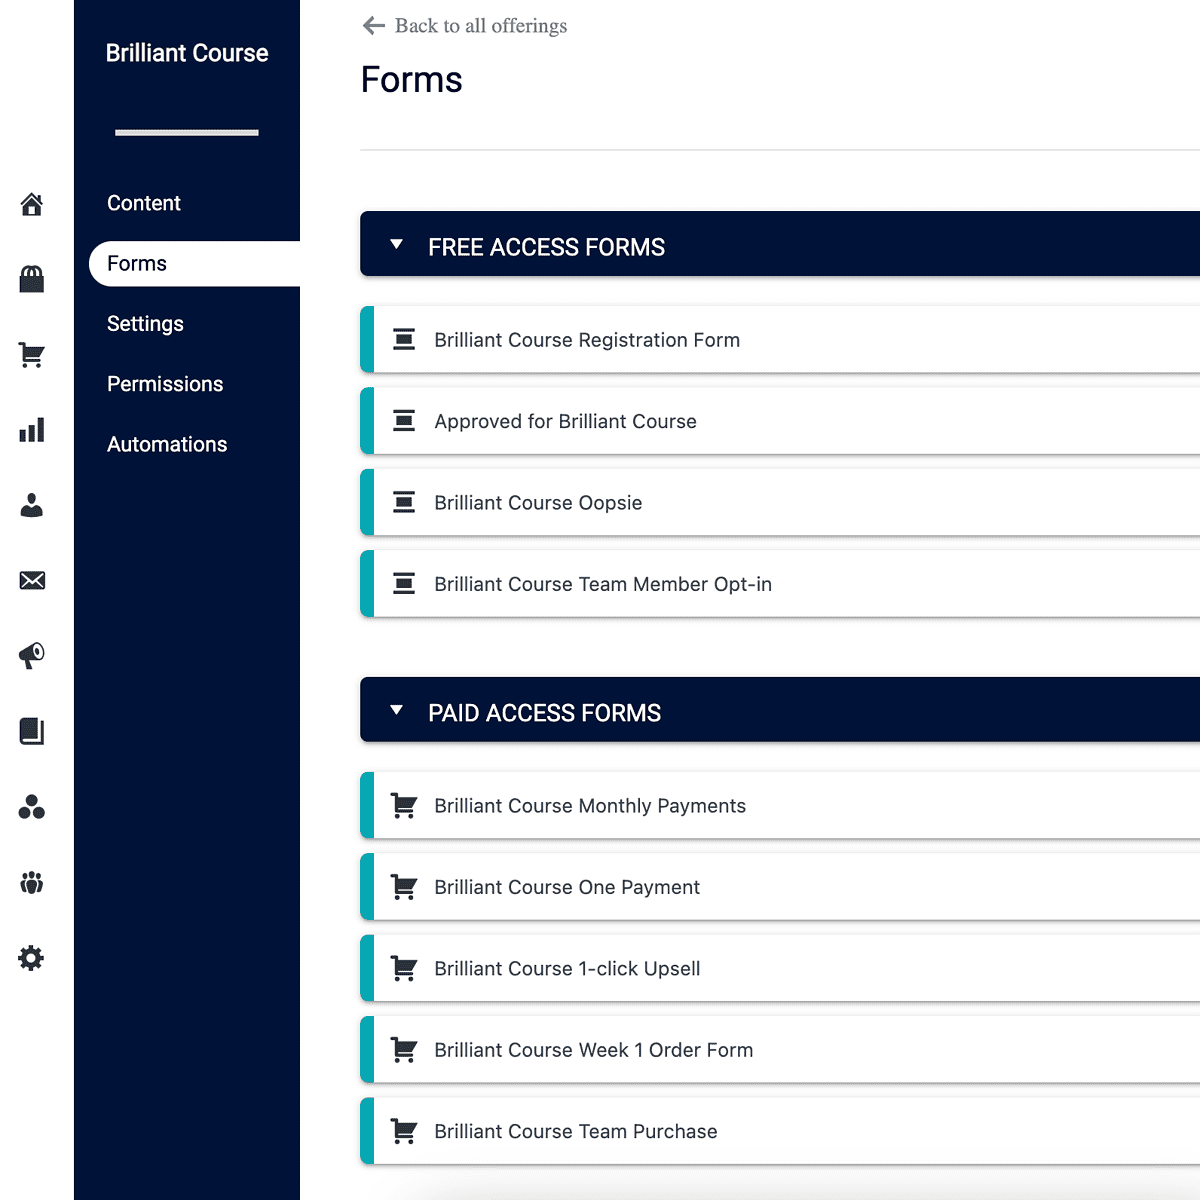 Forms Tab Review